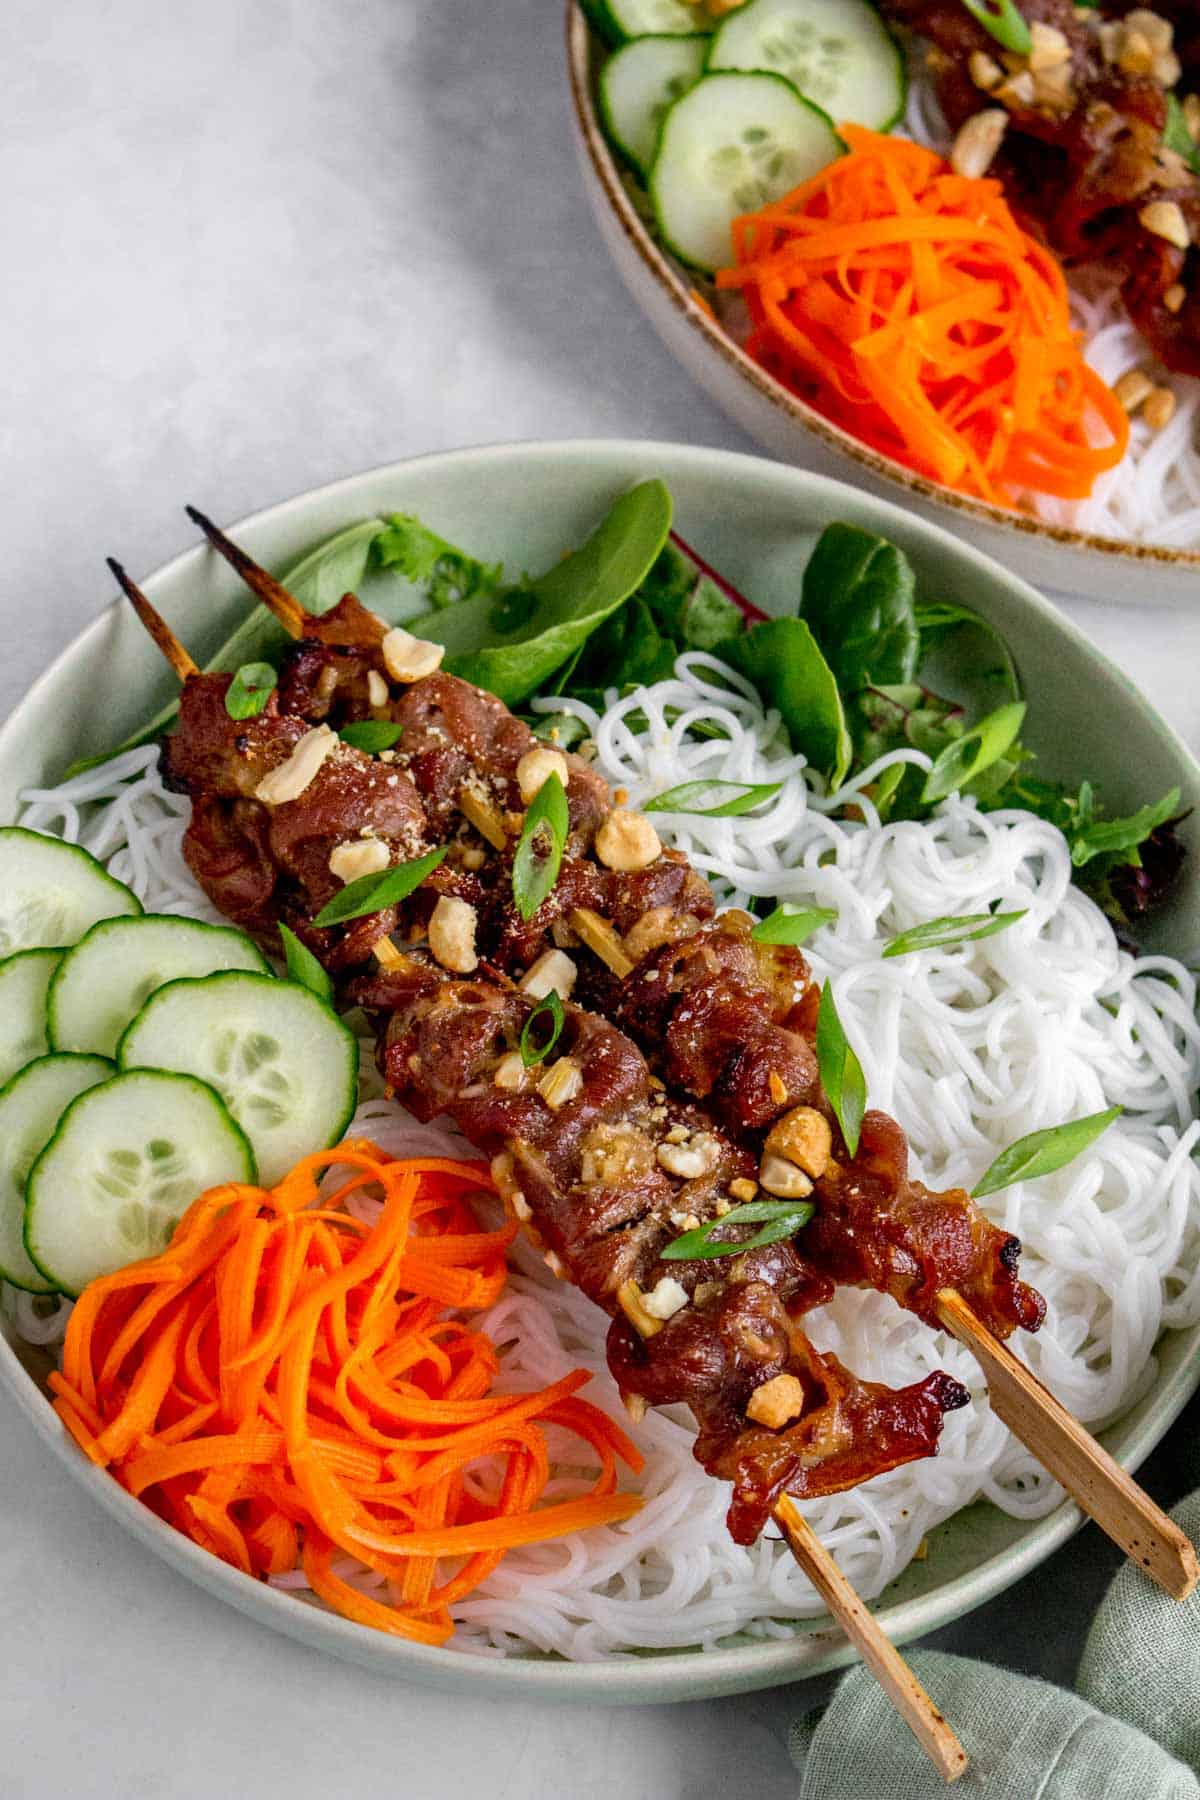 A plate of bun thit nuong (Vietnamese grilled pork with rice-vermicelli noodle).